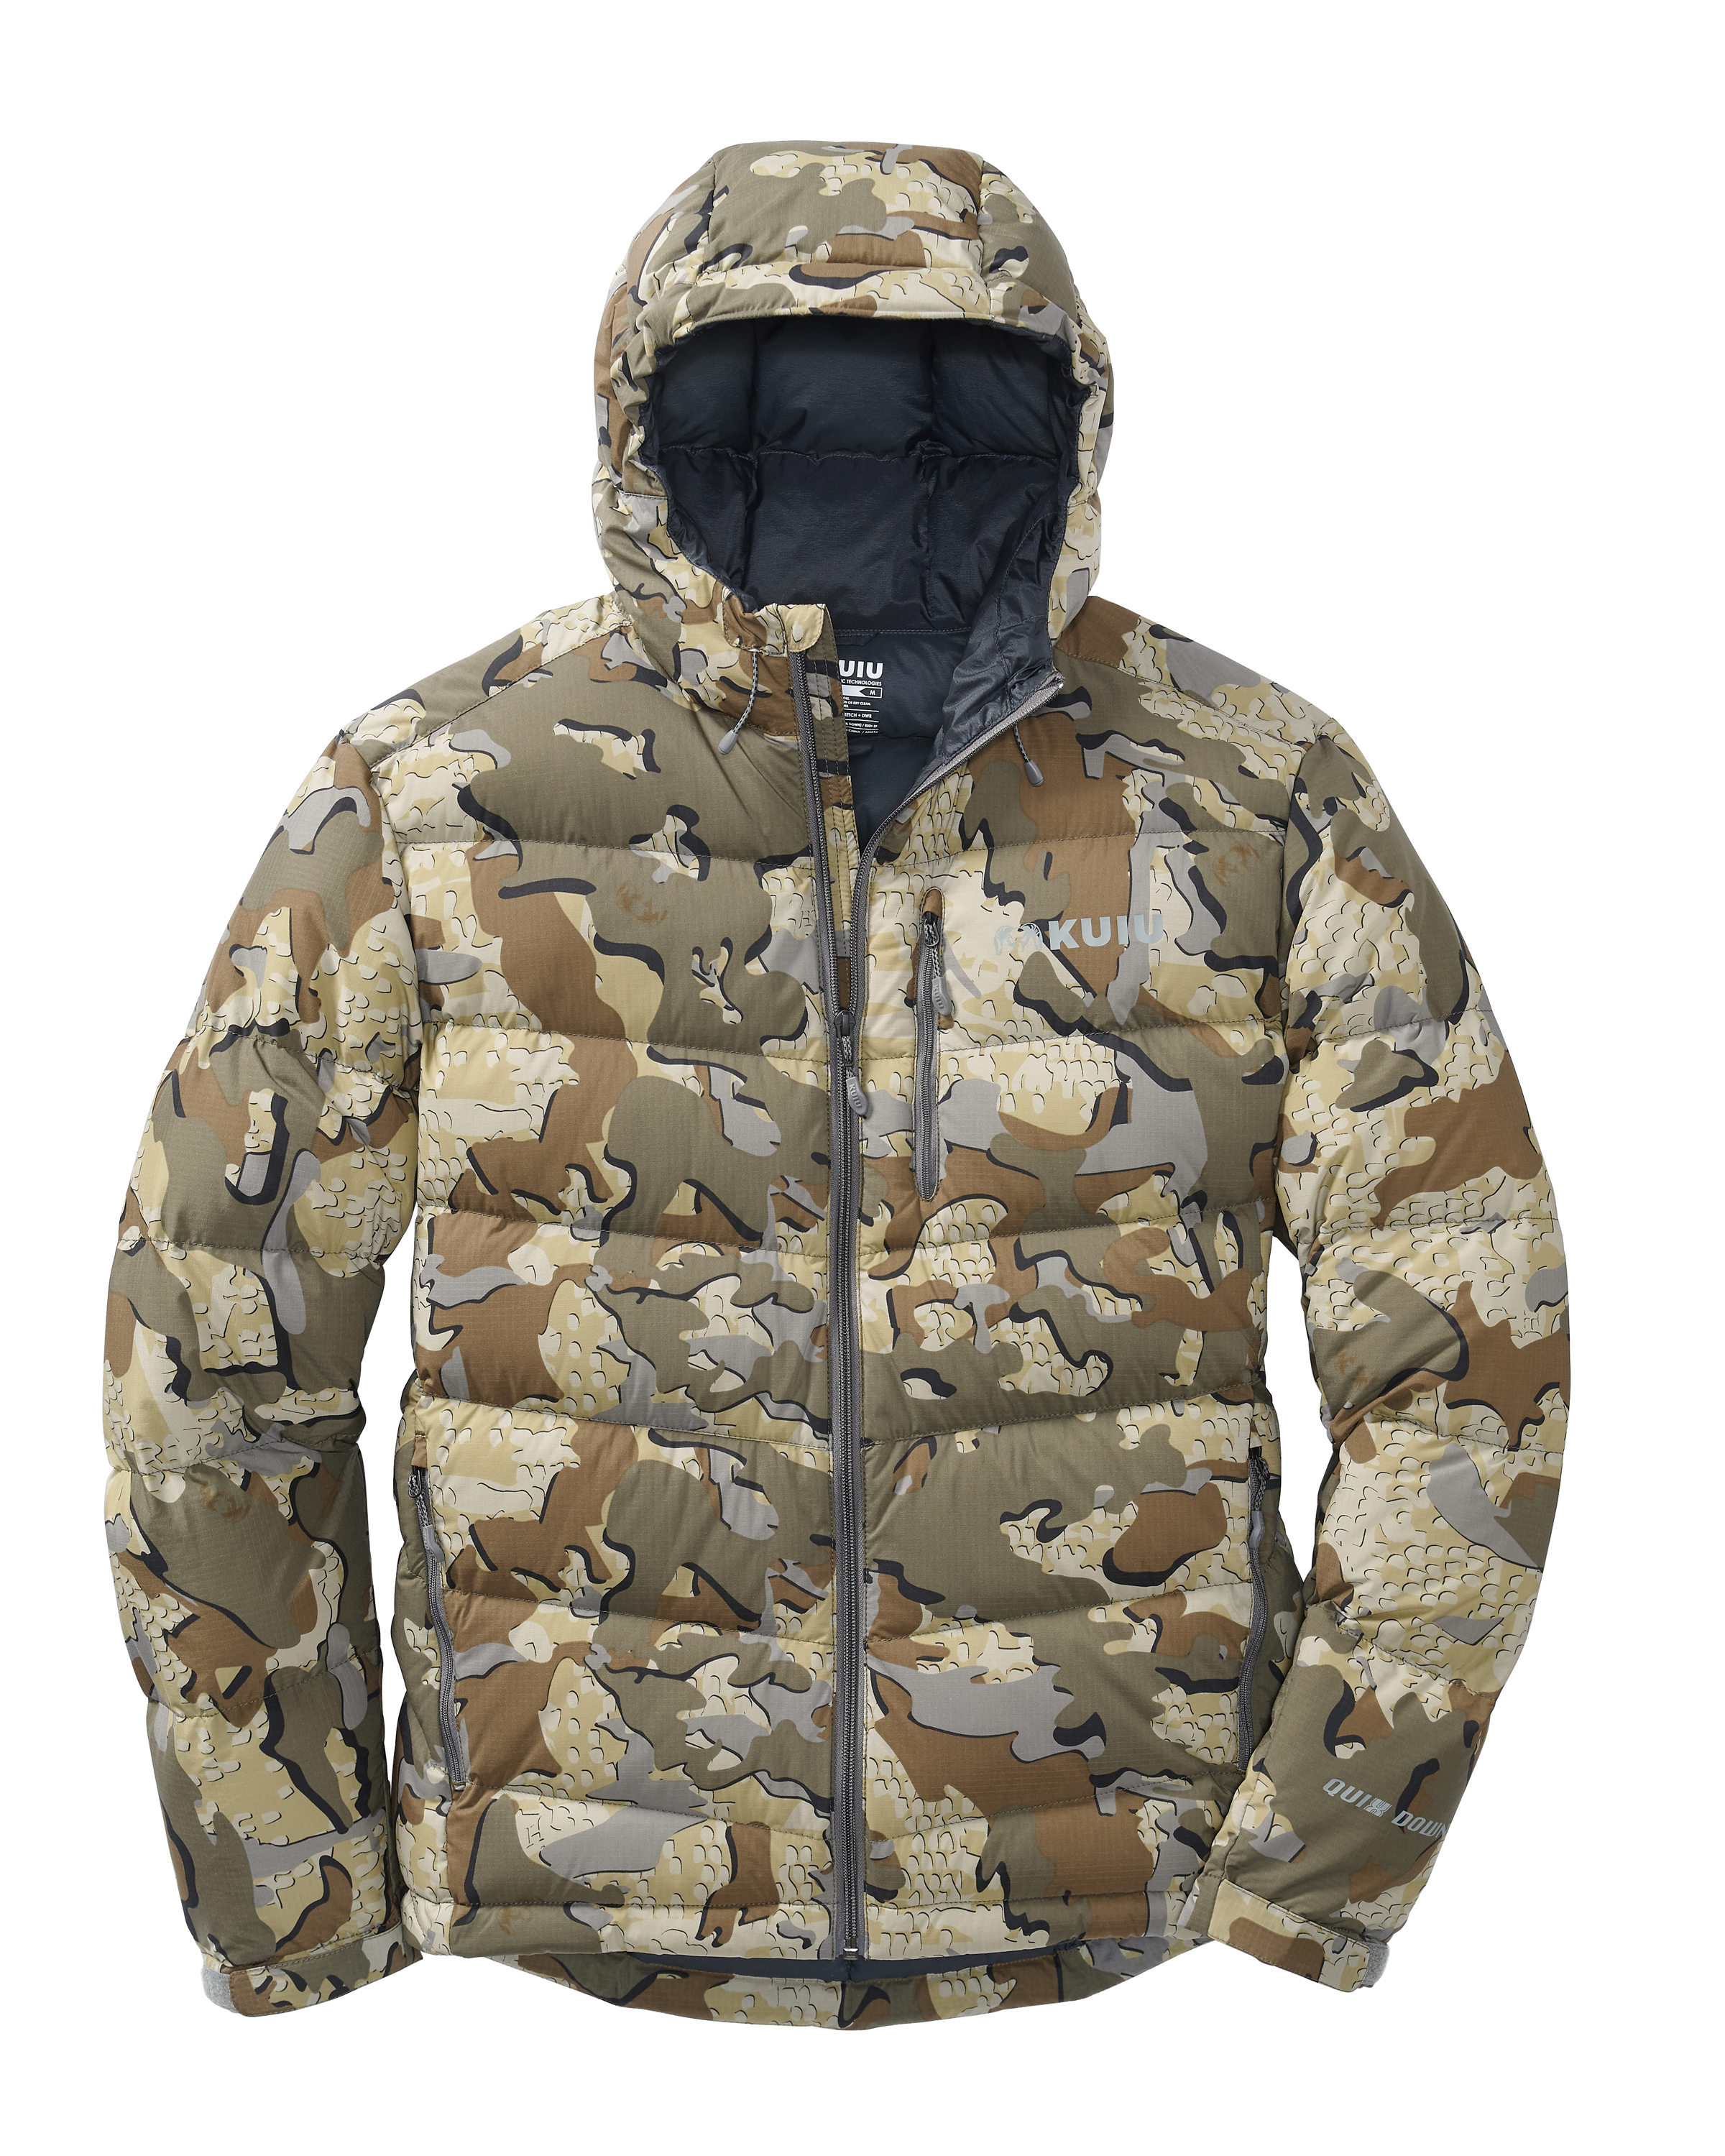 KUIU Super Down PRO Hooded Hunting Jacket in Valo | Size 3XL